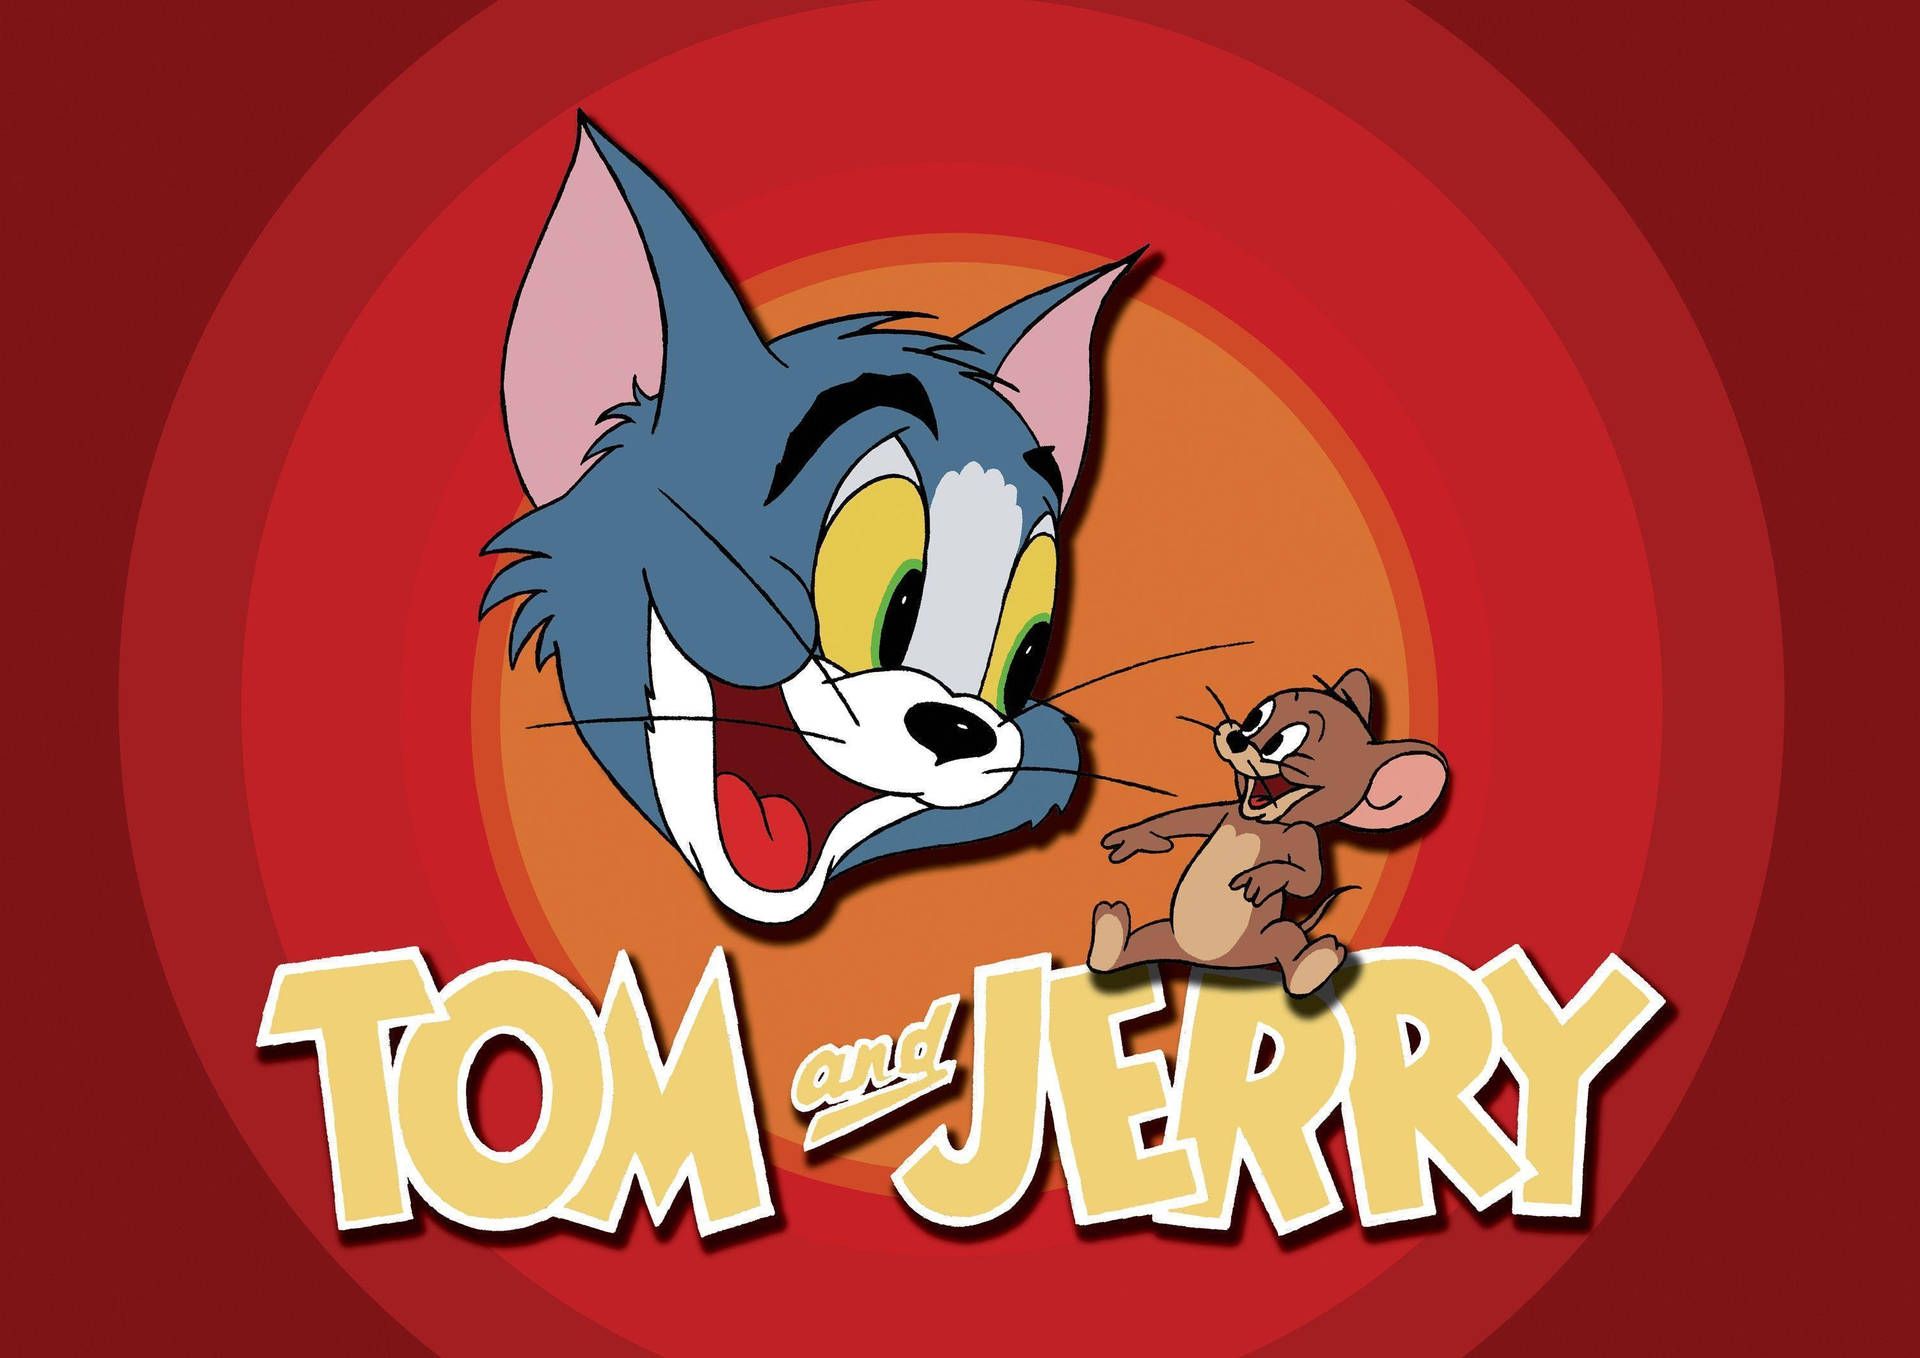 Free Tom And Jerry Wallpaper Downloads, Tom And Jerry Wallpaper for FREE